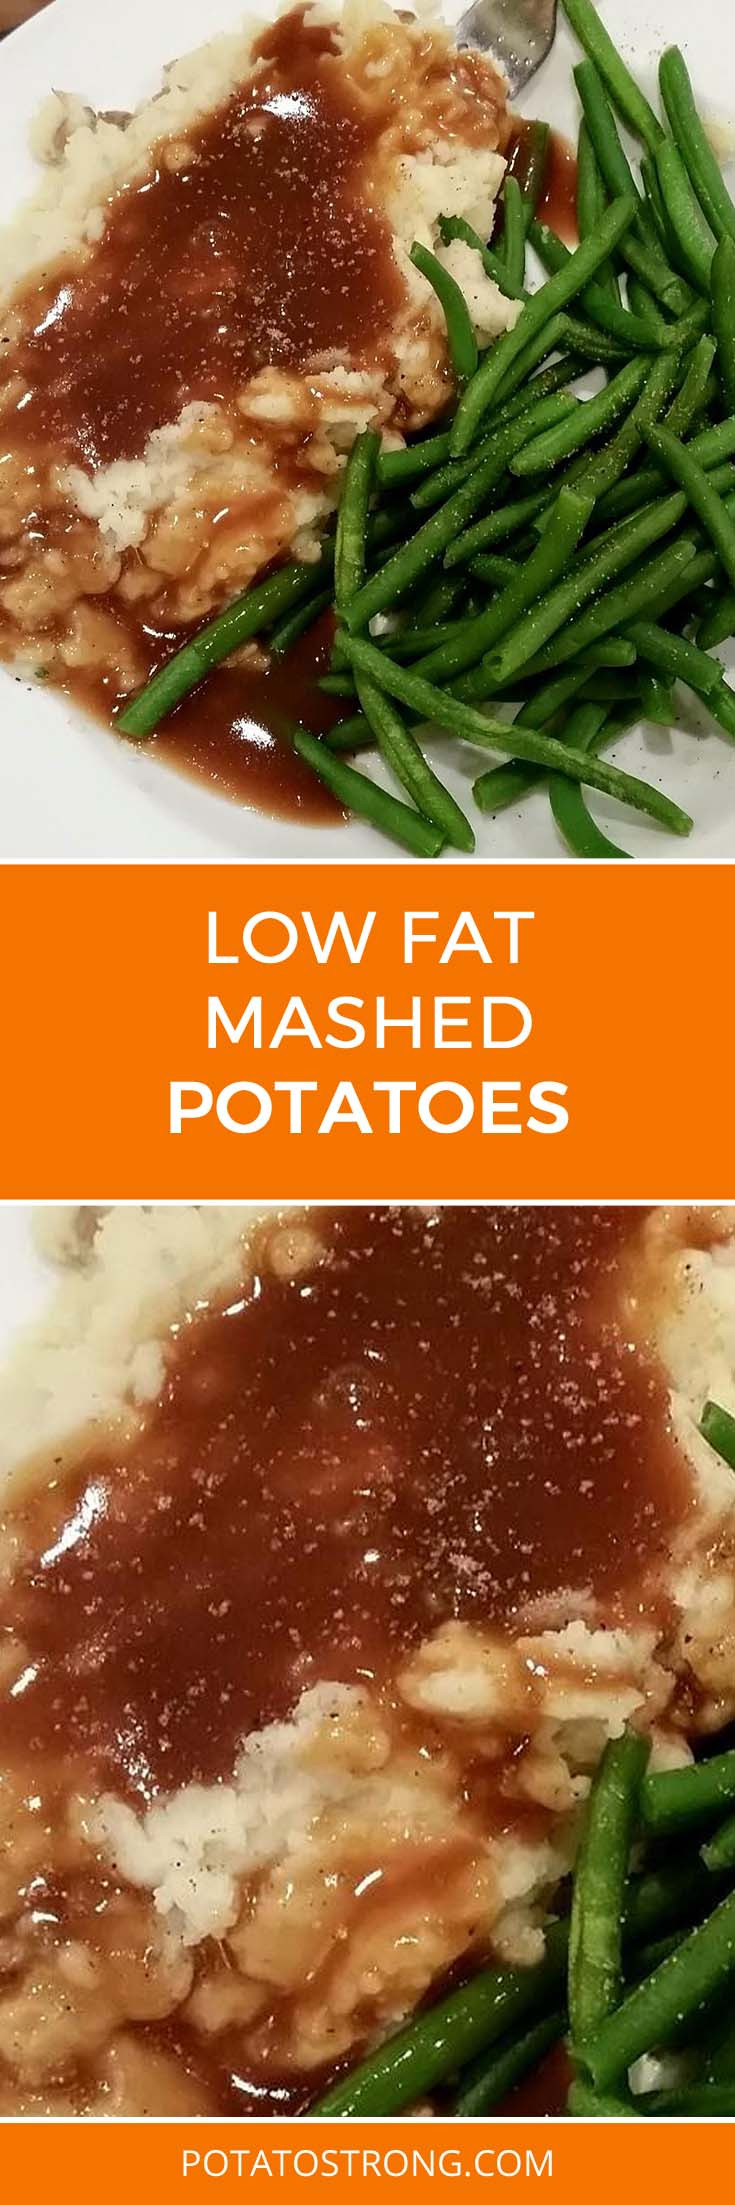 No Dairy Mashed Potatoes
 Low Fat Mashed Potatoes No Milk Butter Needed Potato